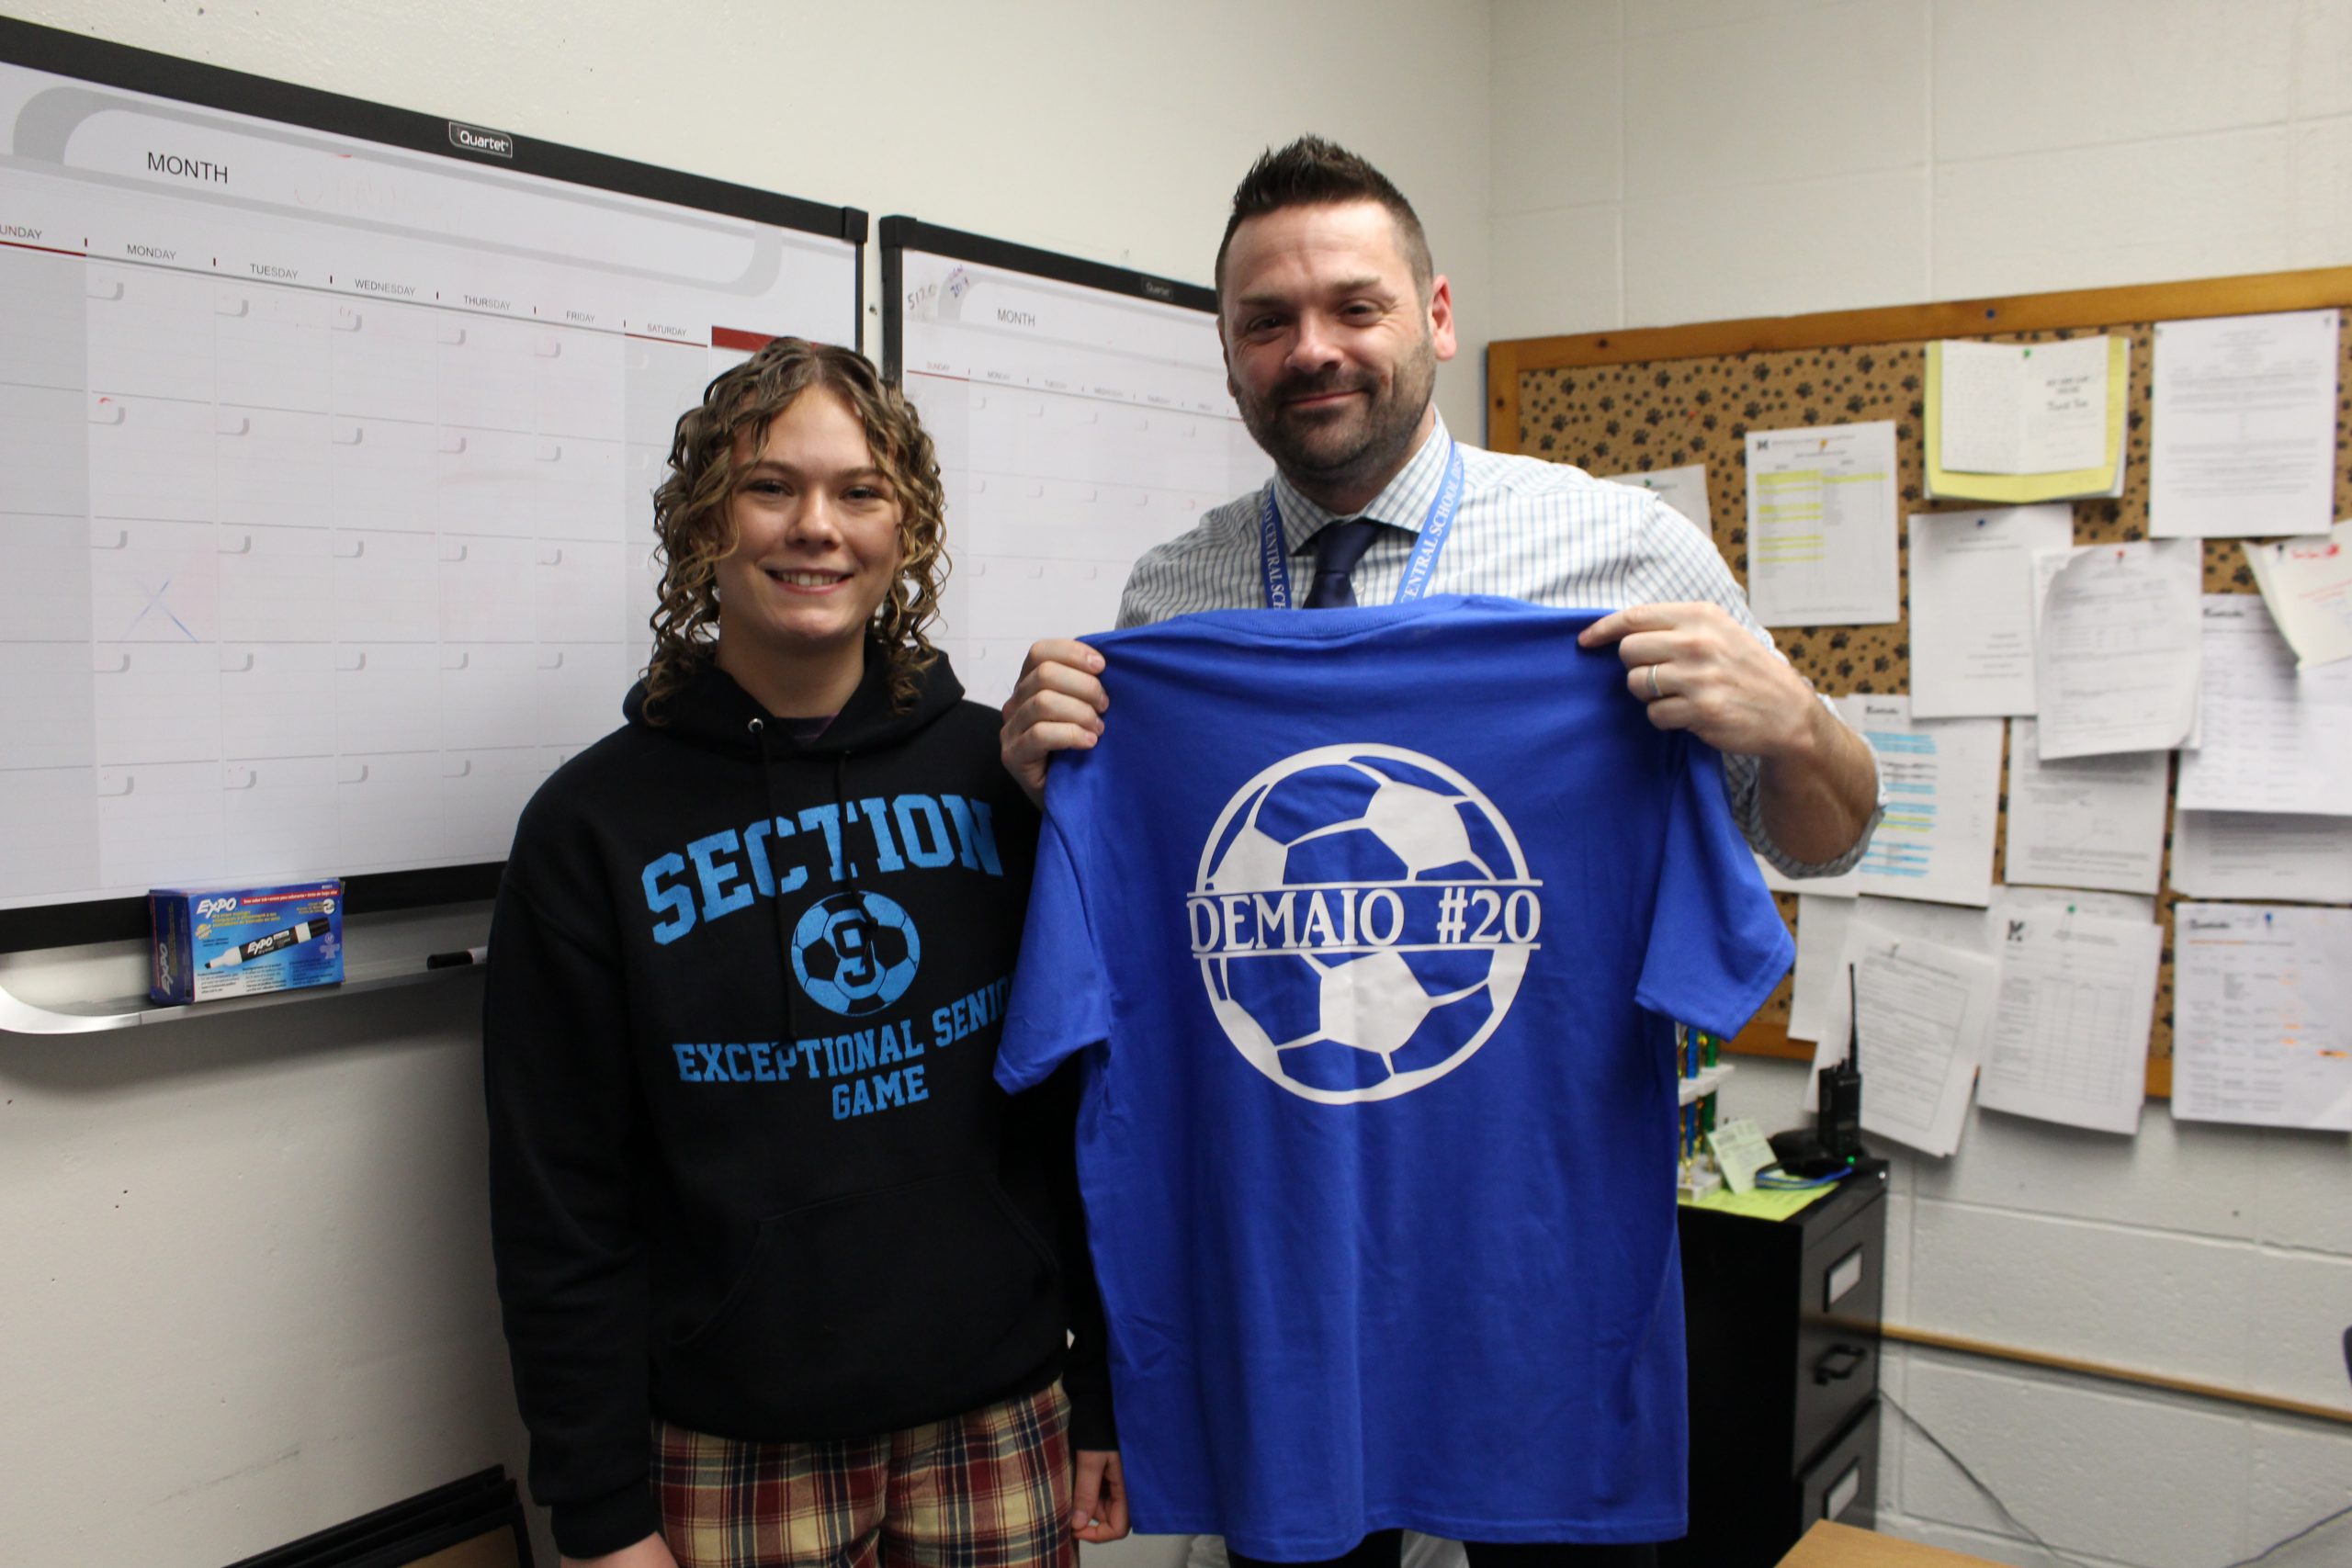 a student is posing with a teacher who is holding up a tshirt